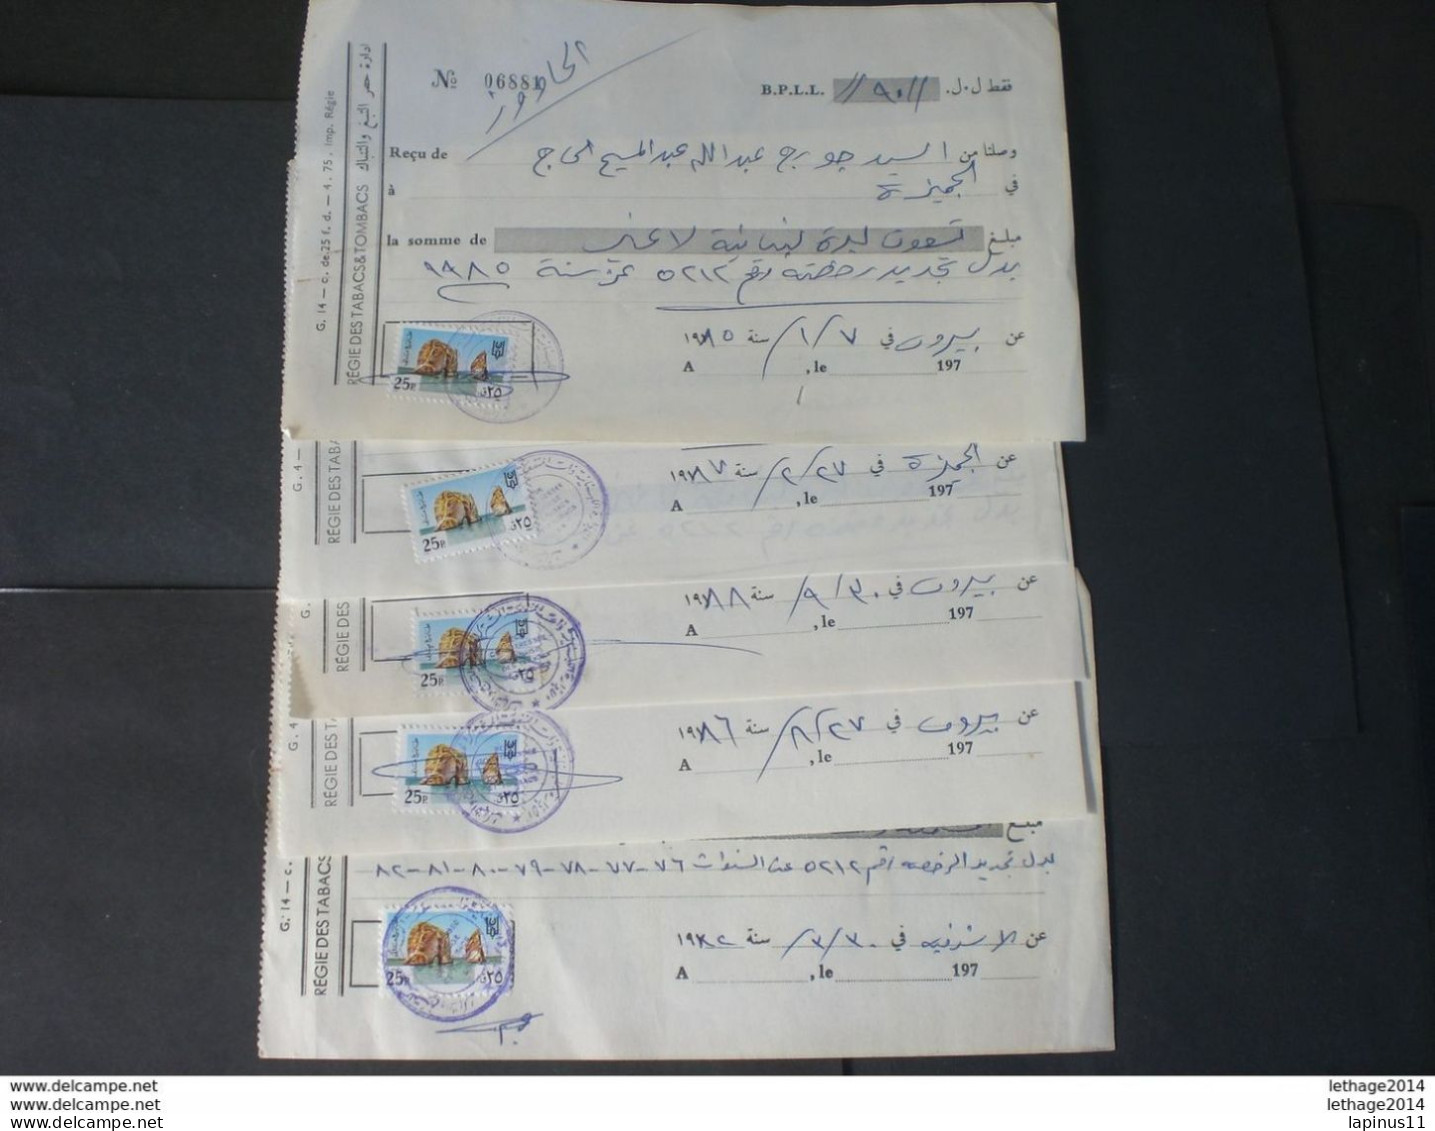 LEBANON لبنان GRAND LIBAN STAMPS TAXE TAX FISCAL REVENUE ORIGINAL NUMBER 88 DOCUMENT + 7 PHOTO - Libanon